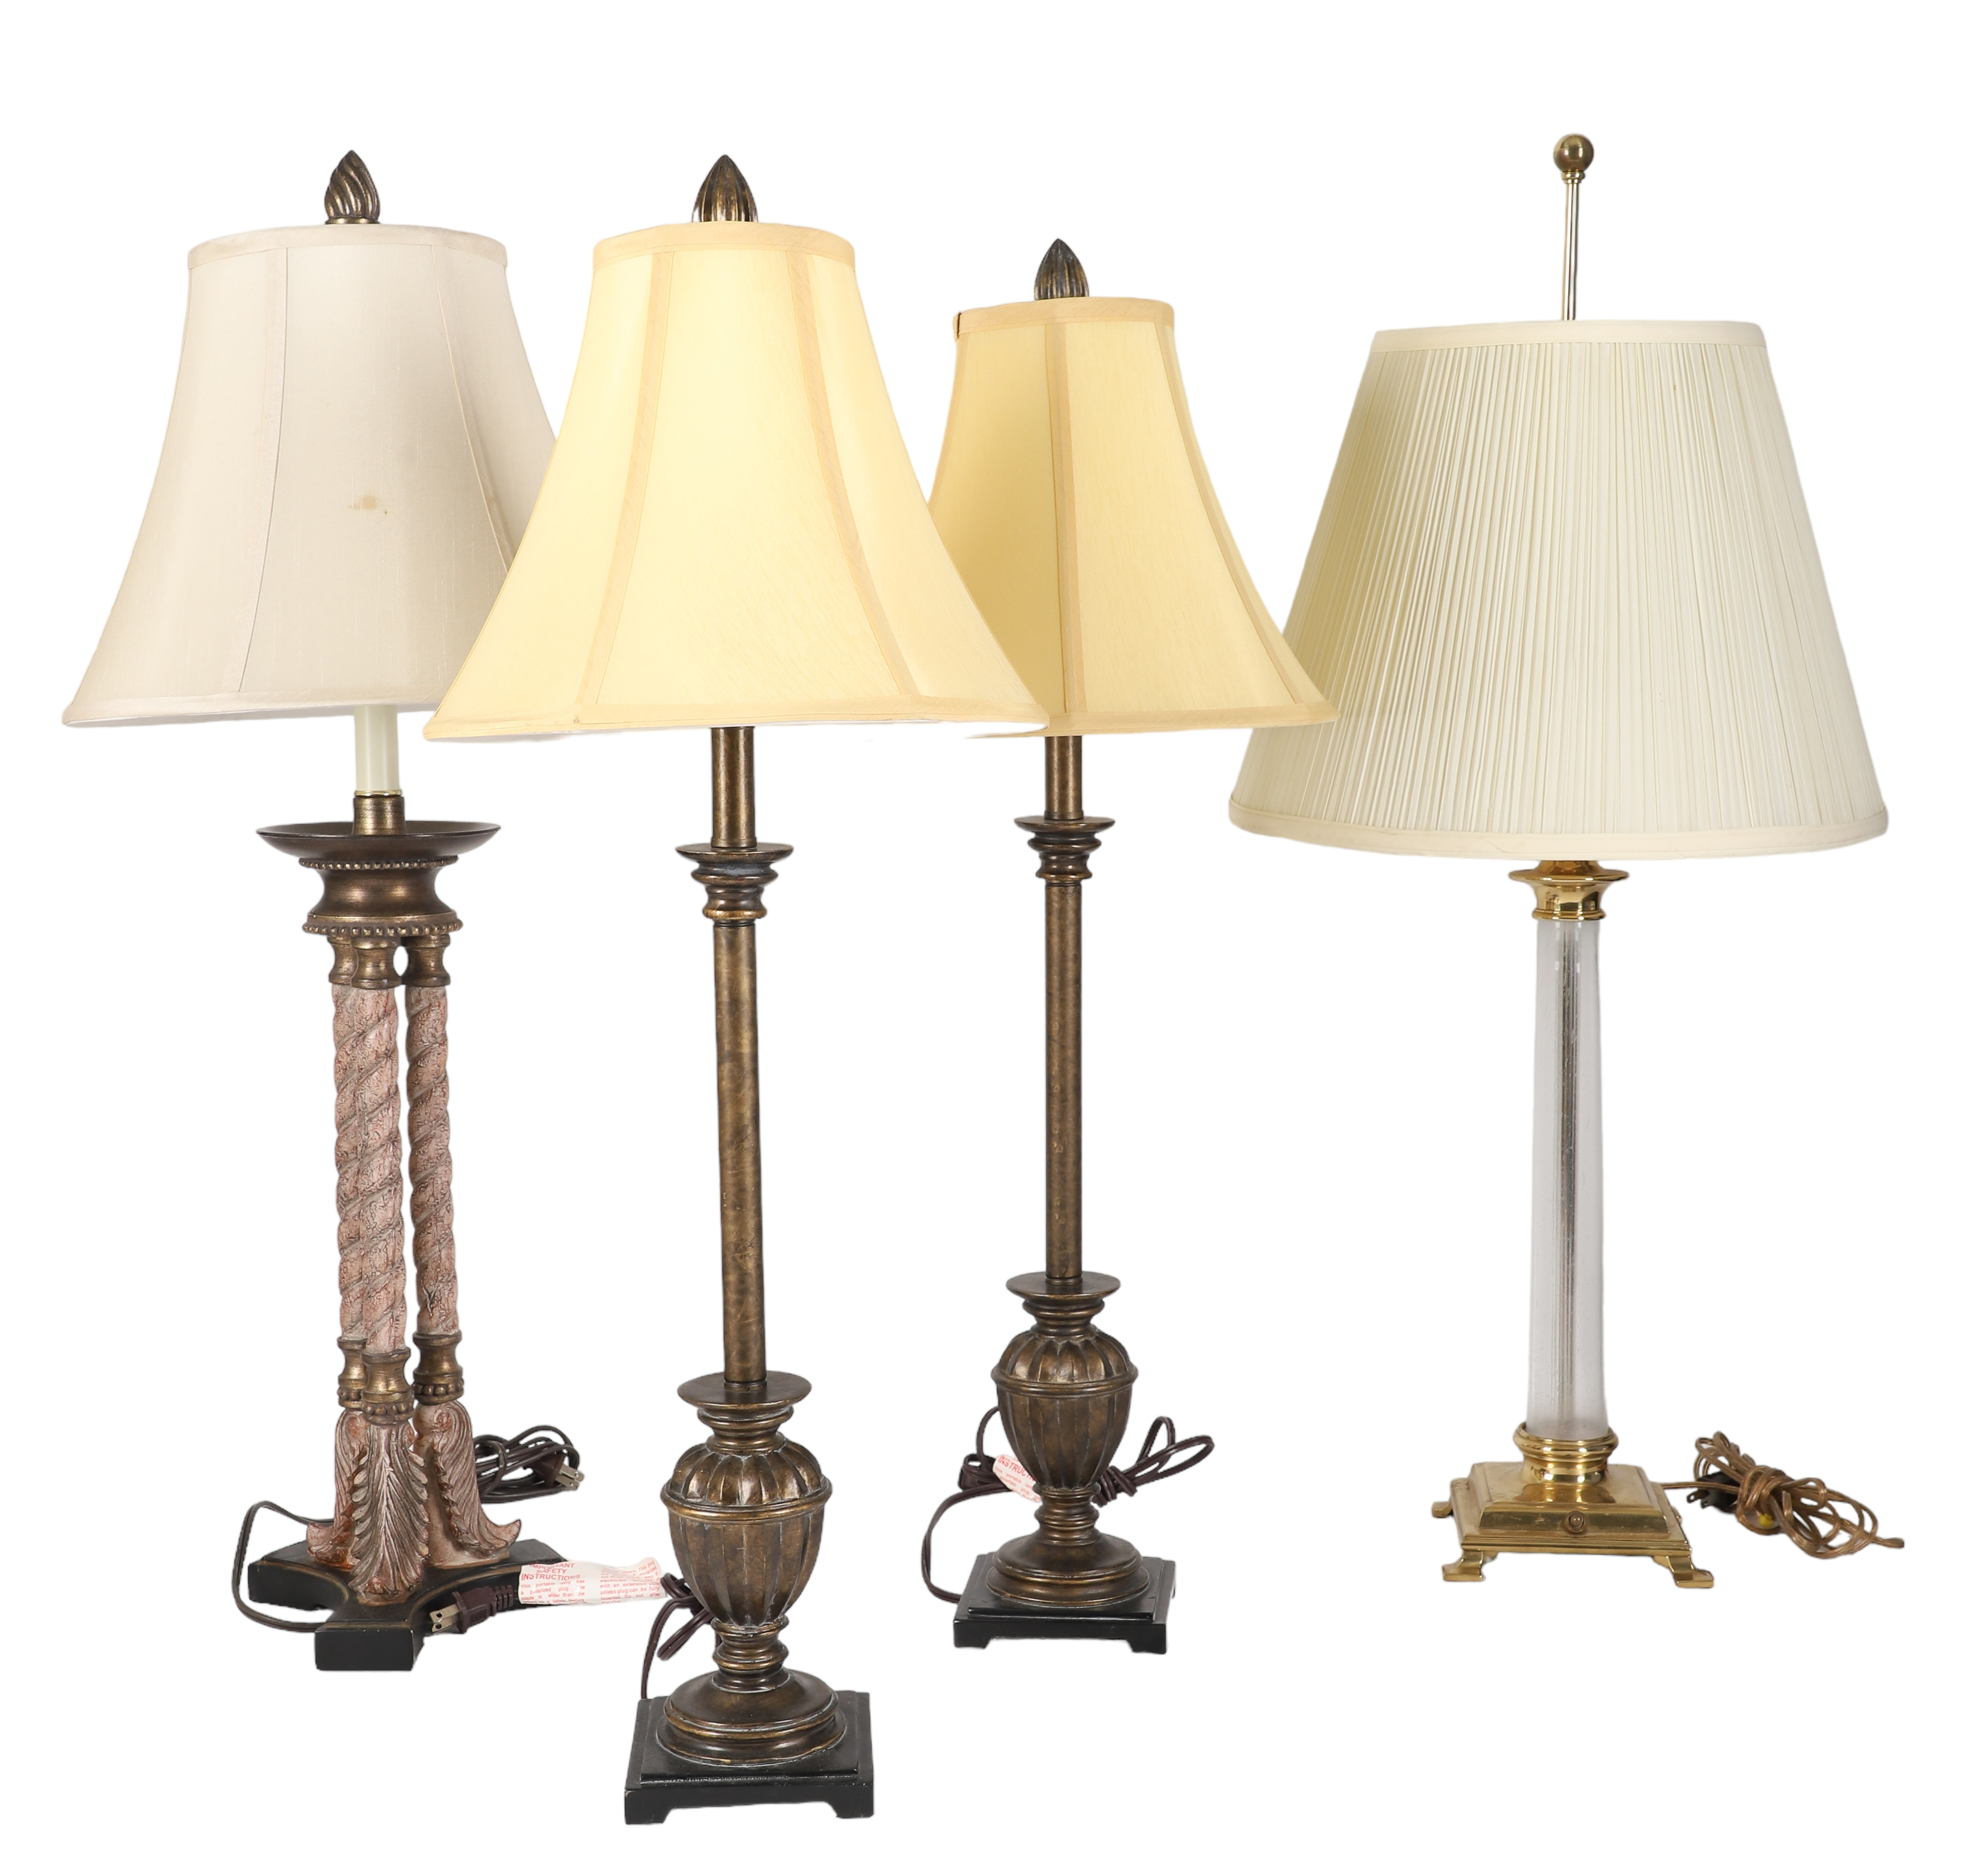  4 Contemporary table lamps c o 3b166d